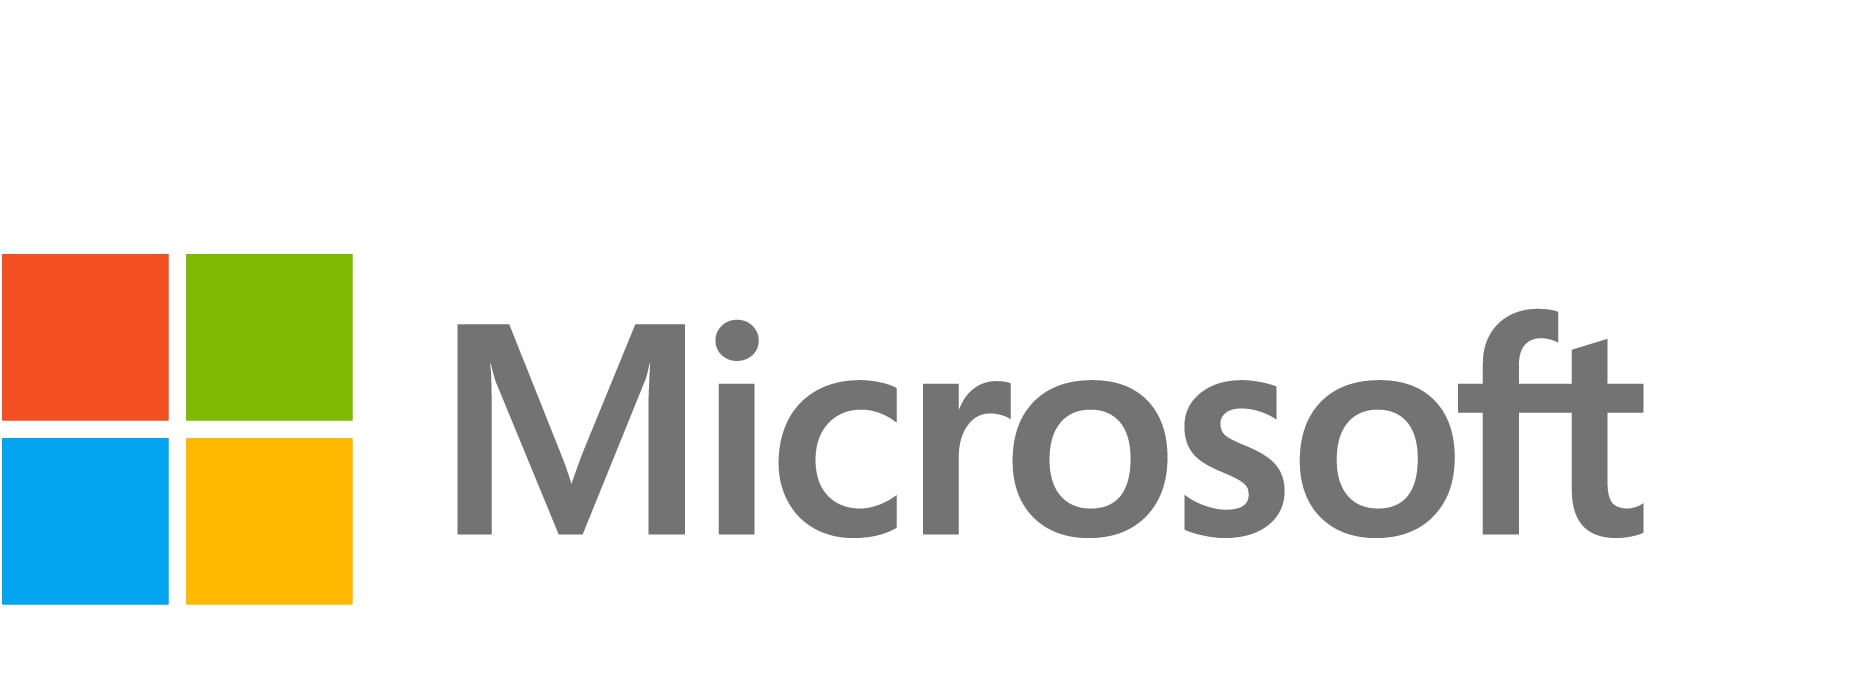 Microsoft Power Pages - subscription license (1 month) - 100 authenticated users per web site